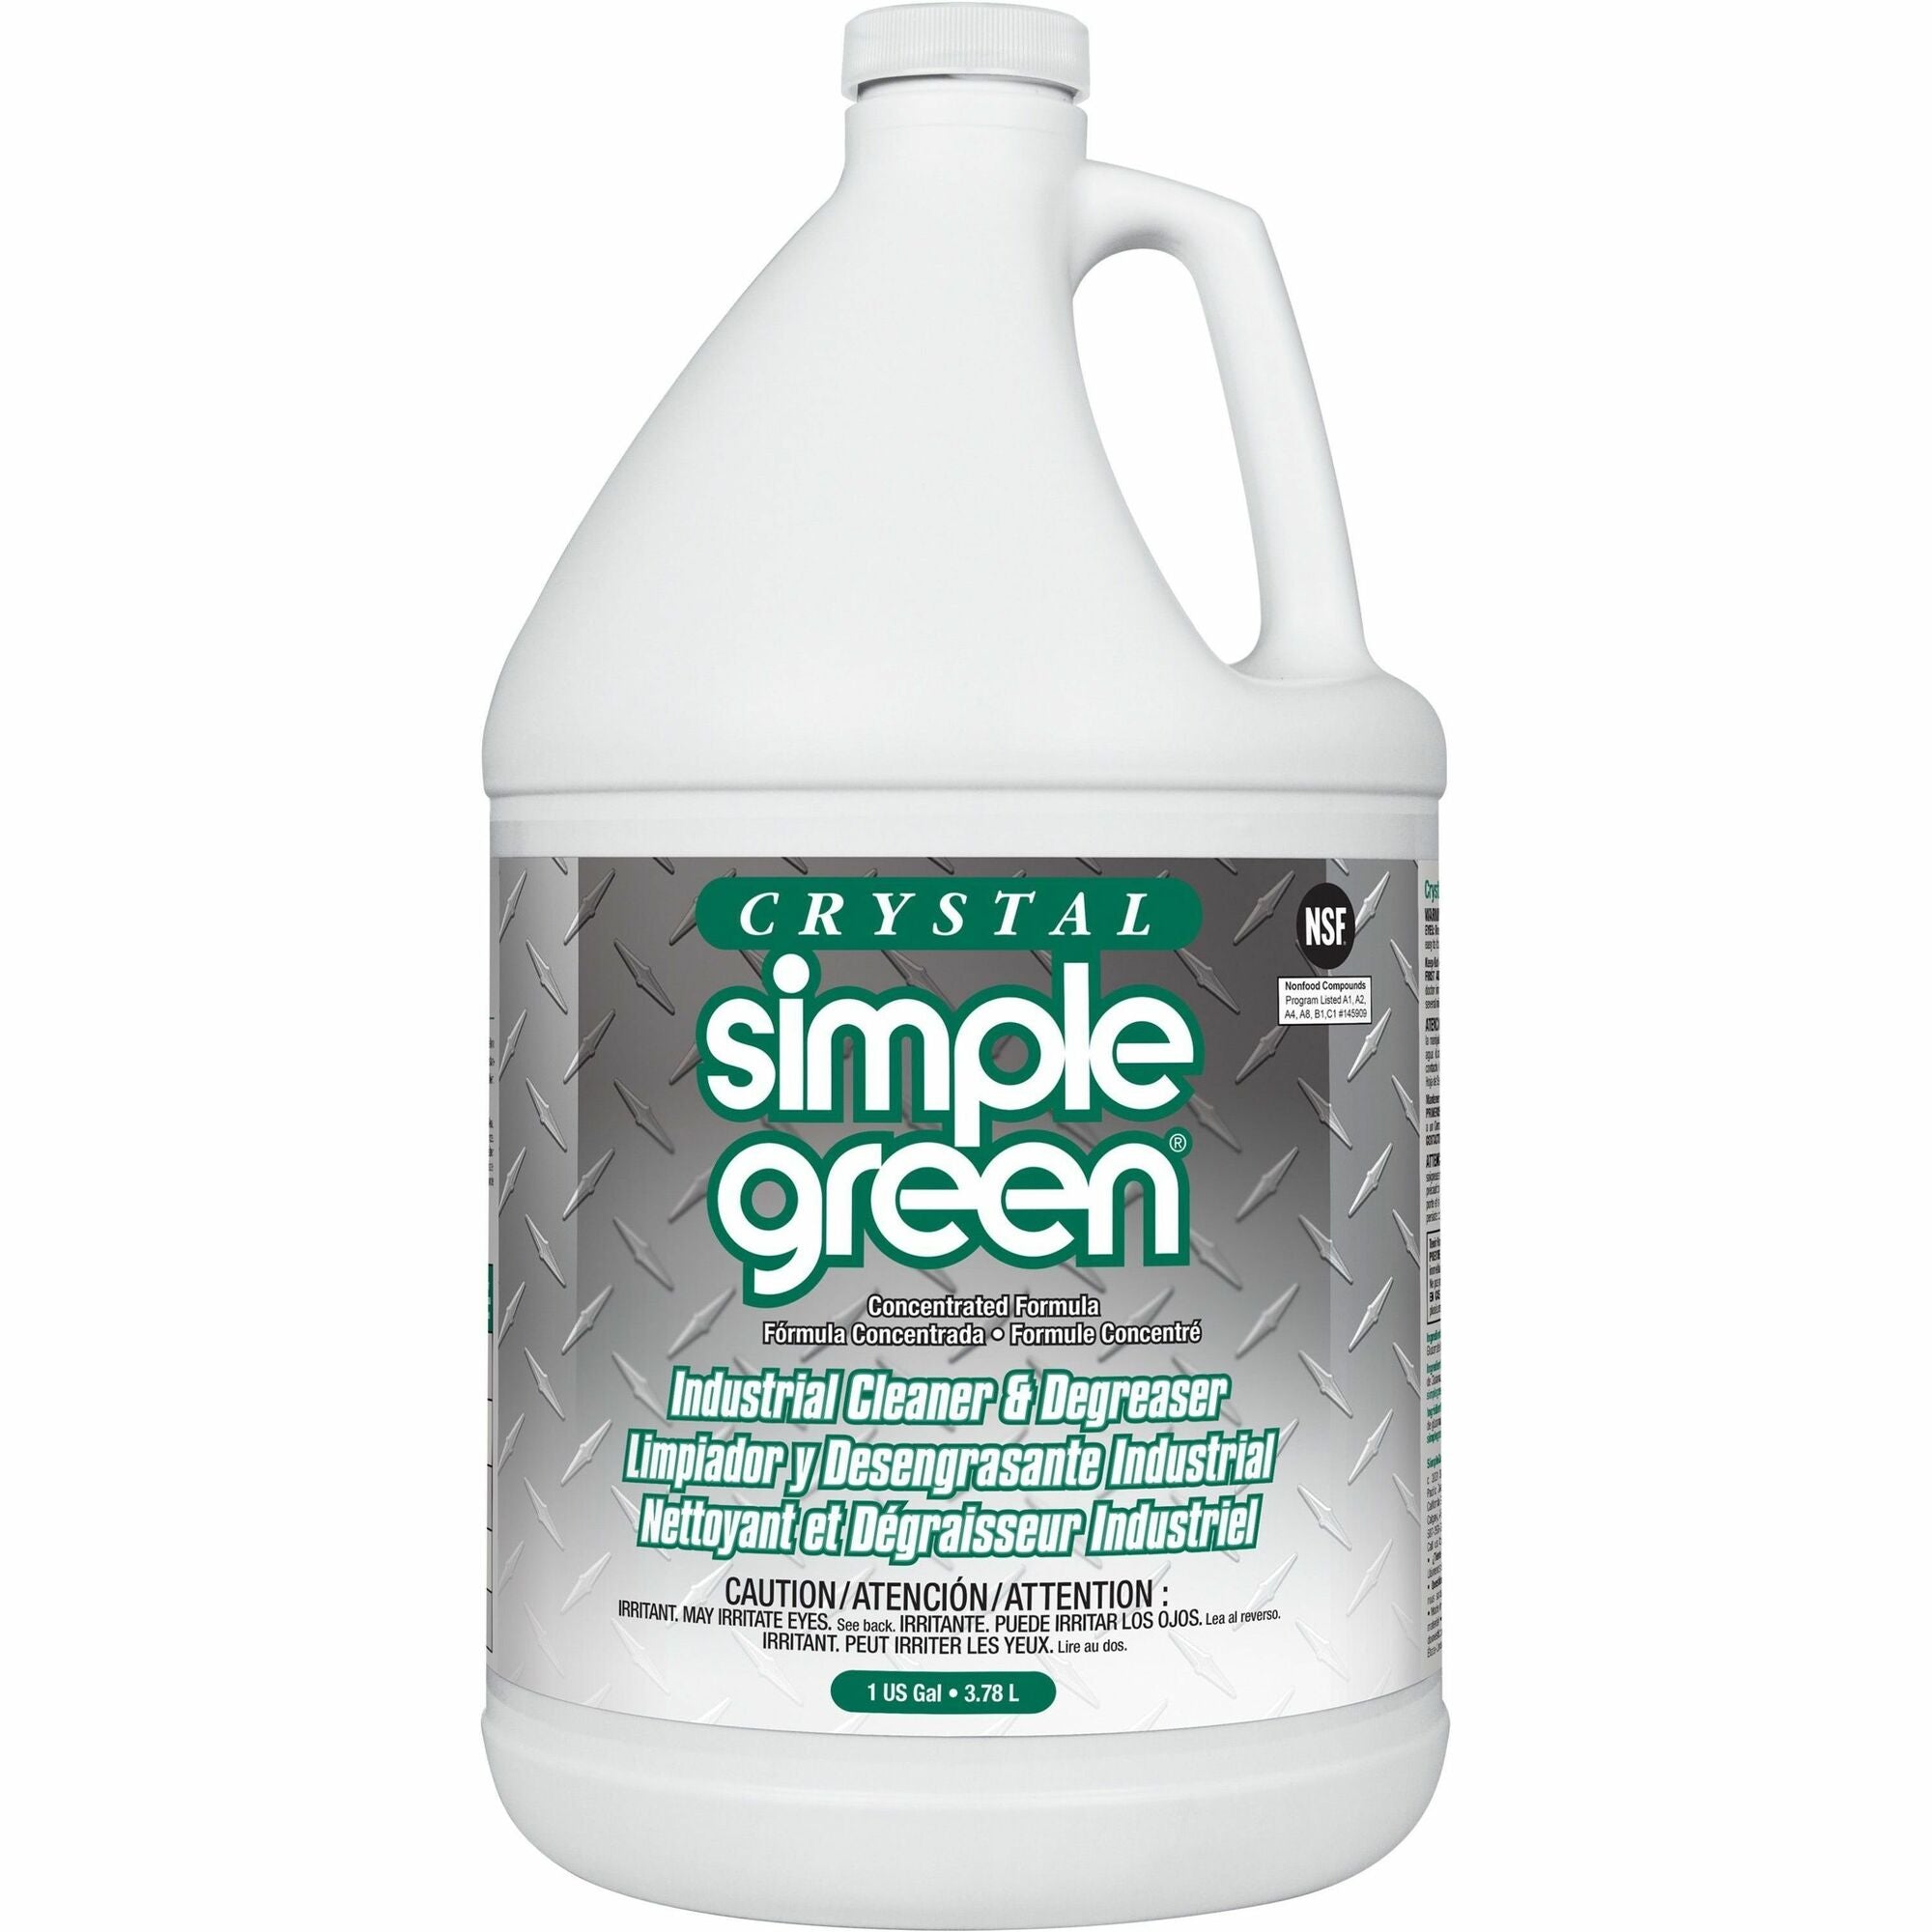 simple-green-crystal-industrial-cleaner-degreaser-concentrate-128-fl-oz-4-quartbottle-6-carton-fragrance-free-phosphate-free-non-toxic-soft-non-abrasive-non-flammable-butyl-free-unscented-dye-free-clear_smp19128ct - 1